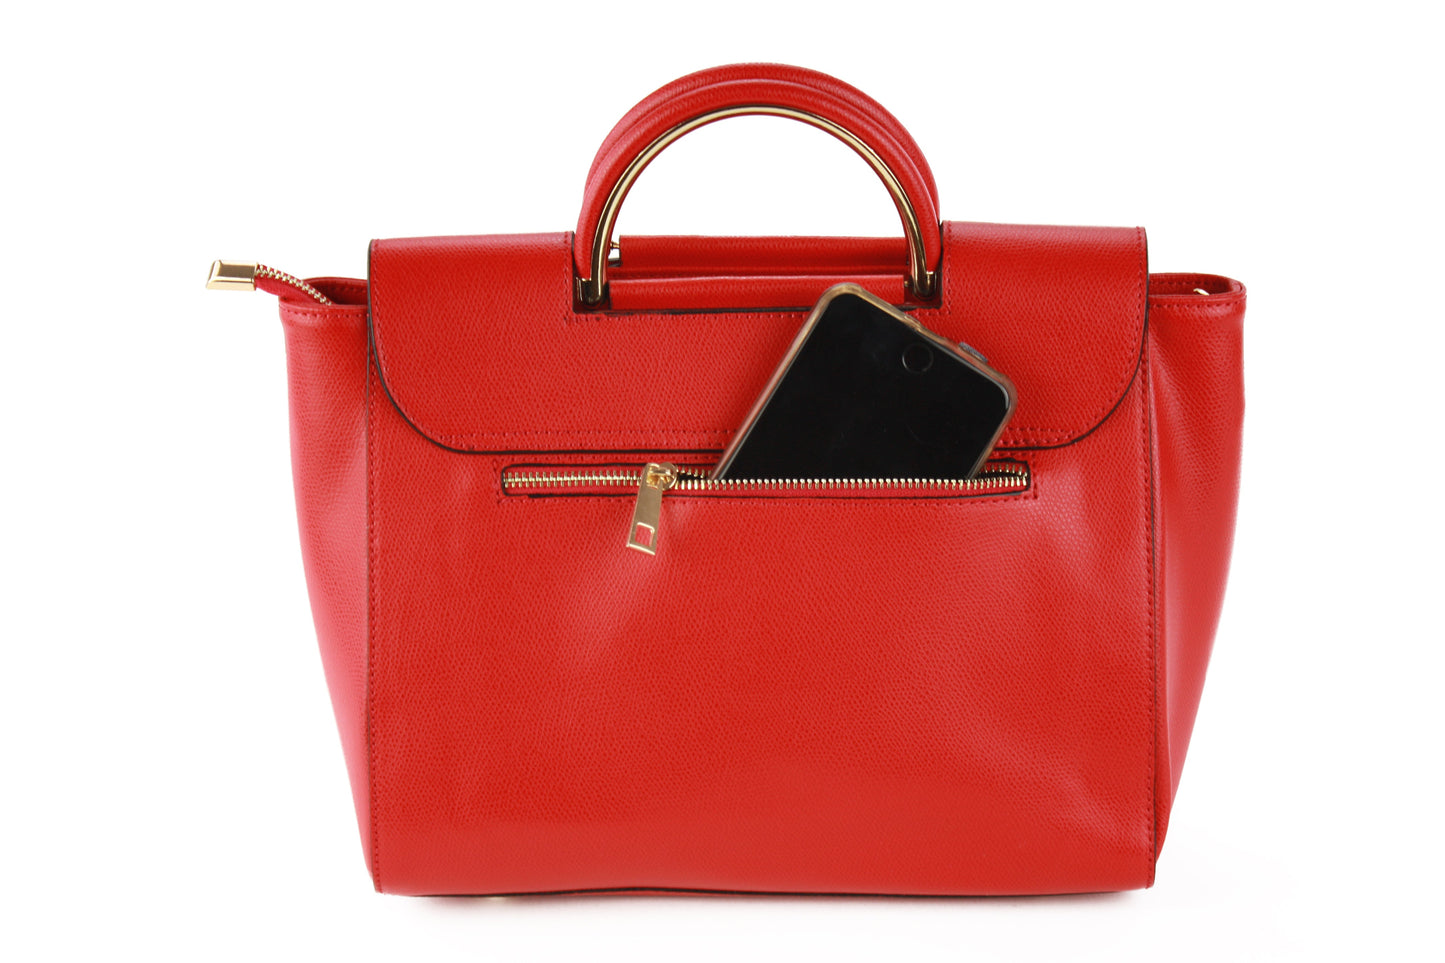 Melissa hand bag in red